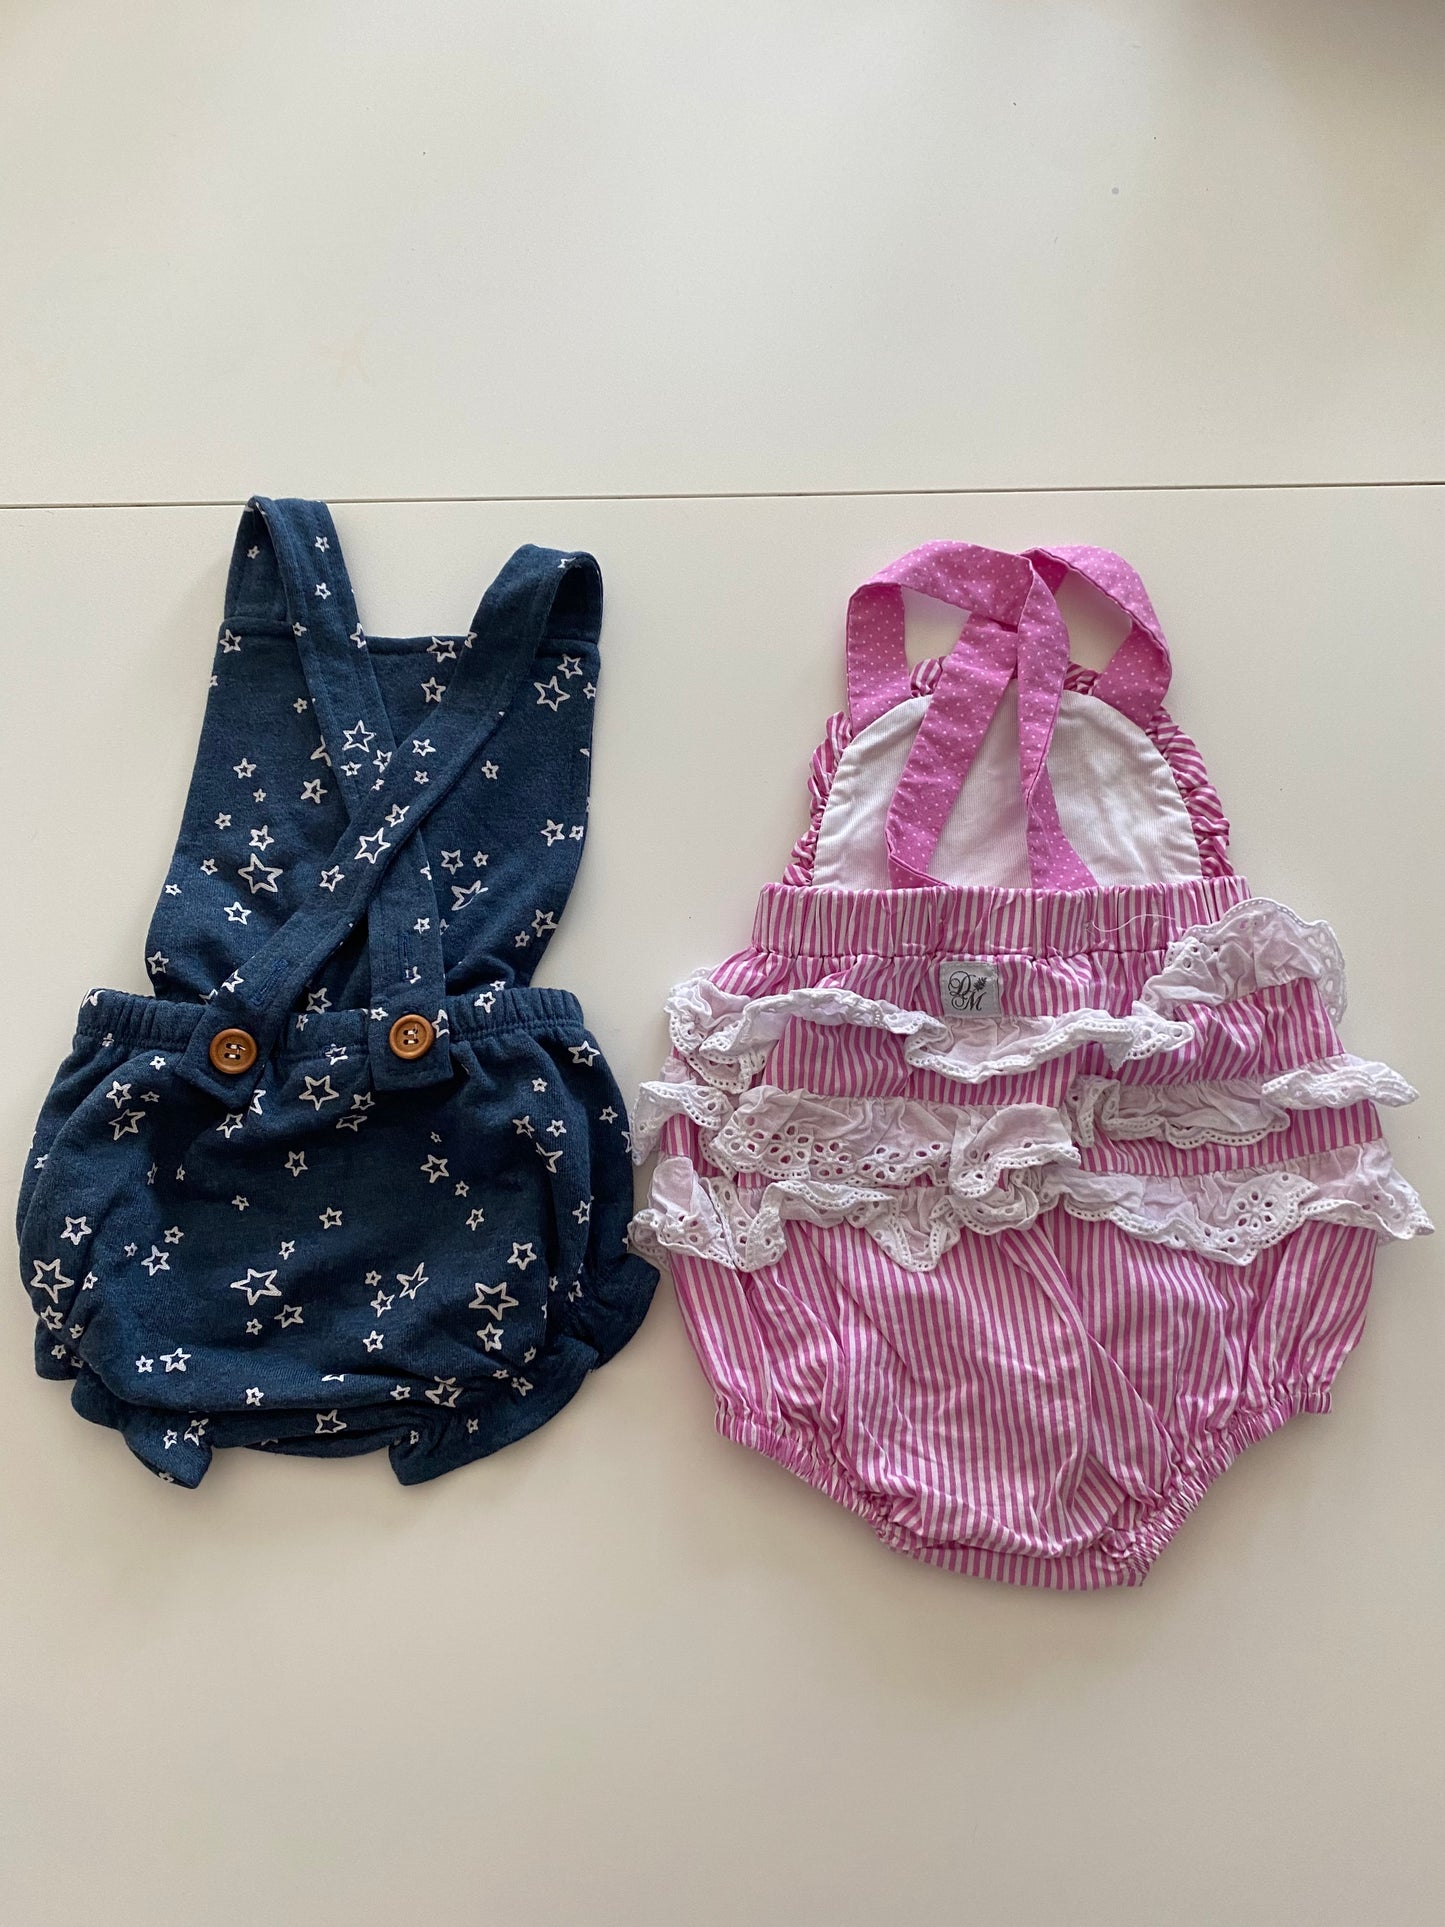 Darling Mae Pink Stripe Bubble Romper and Lulu & Roo navy and star romper Girls 18-24M